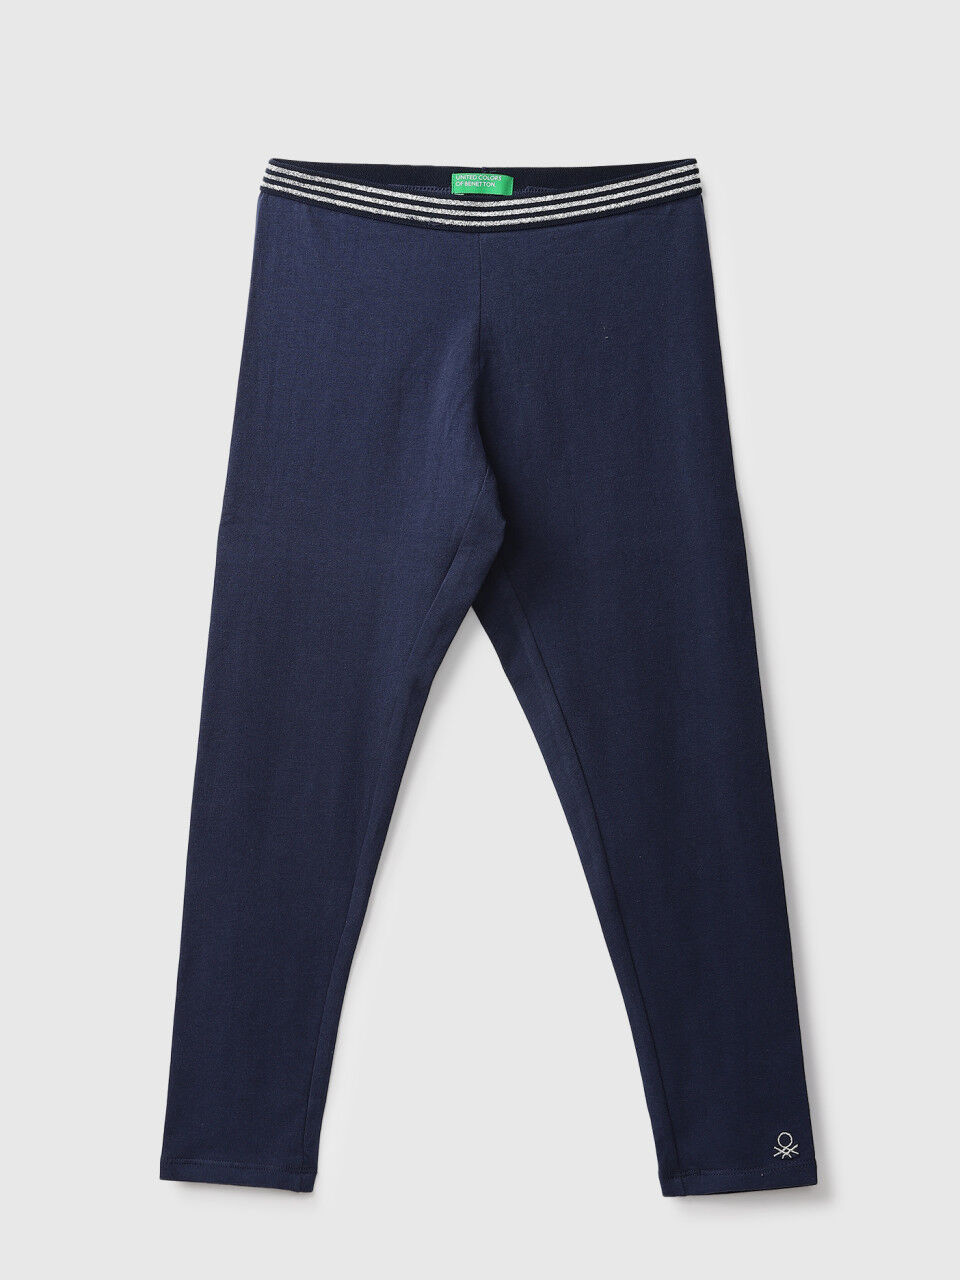 United Colors Of Benetton Navy Blue Legging With Lurex Waist Band